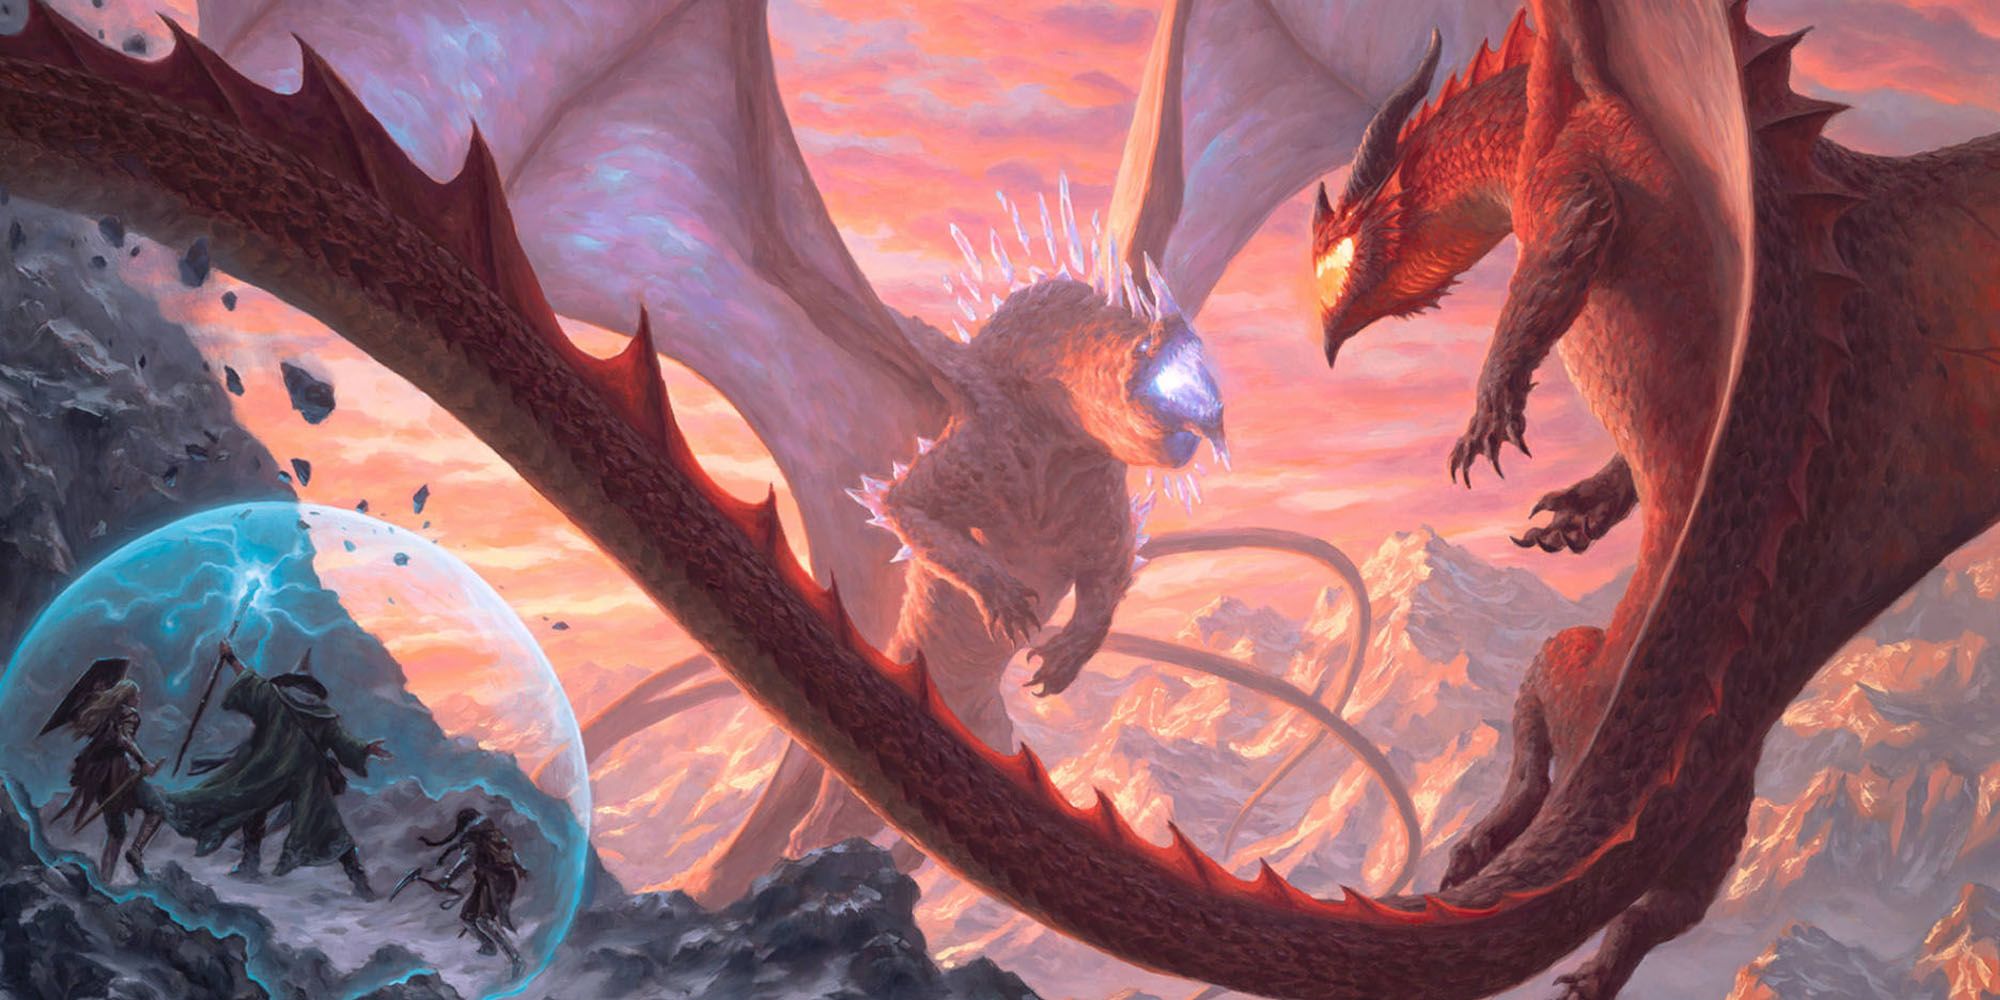 DnD Fizban's Treasury of Dragons cover art, with dragons flying over mountains.